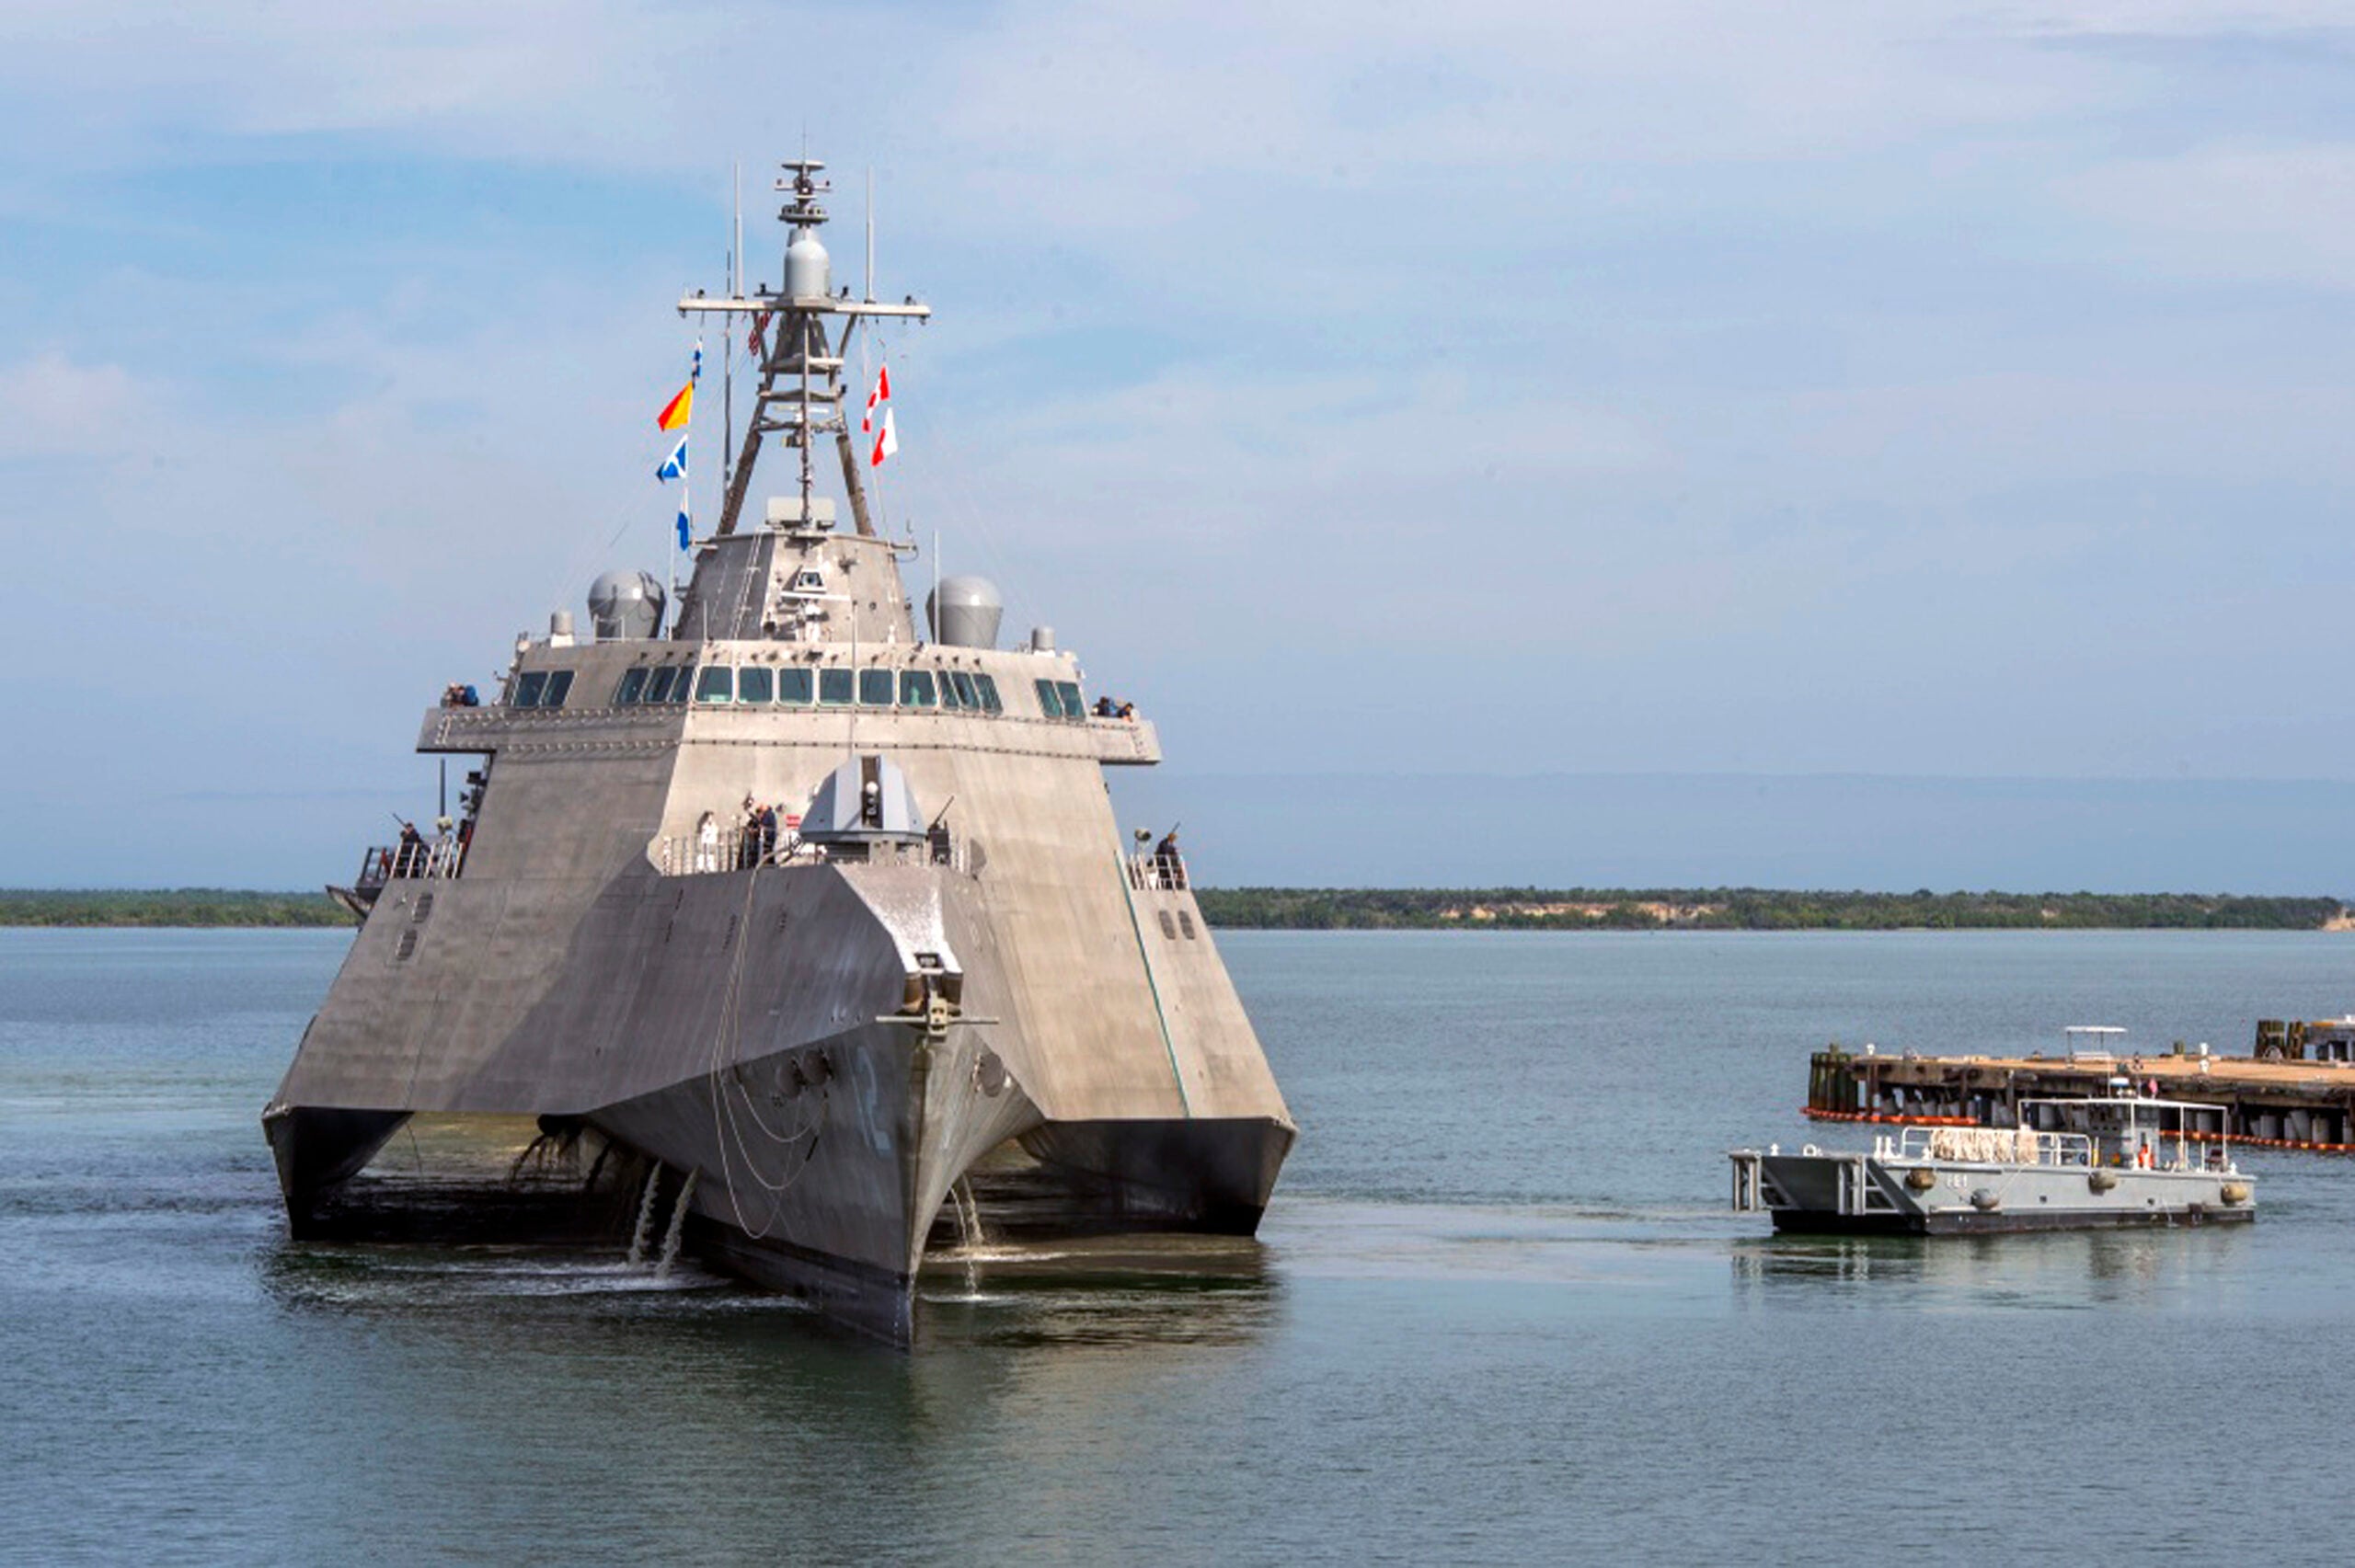 In this Jan. 3, 2018, photo released by the U.S. Navy, a Naval Station vessel, right, prepares to assist the future USS Omaha (LCS 12), a 218-foot-long littoral combat ship, pier side during a brief fuel stop in Guantanamo Bay, Cuba. The Omaha was conducting a change of homeport to San Diego, Calif. (Mass Communication Specialist 1st Class John Philip Wagner, Jr./U.S. Navy via AP)